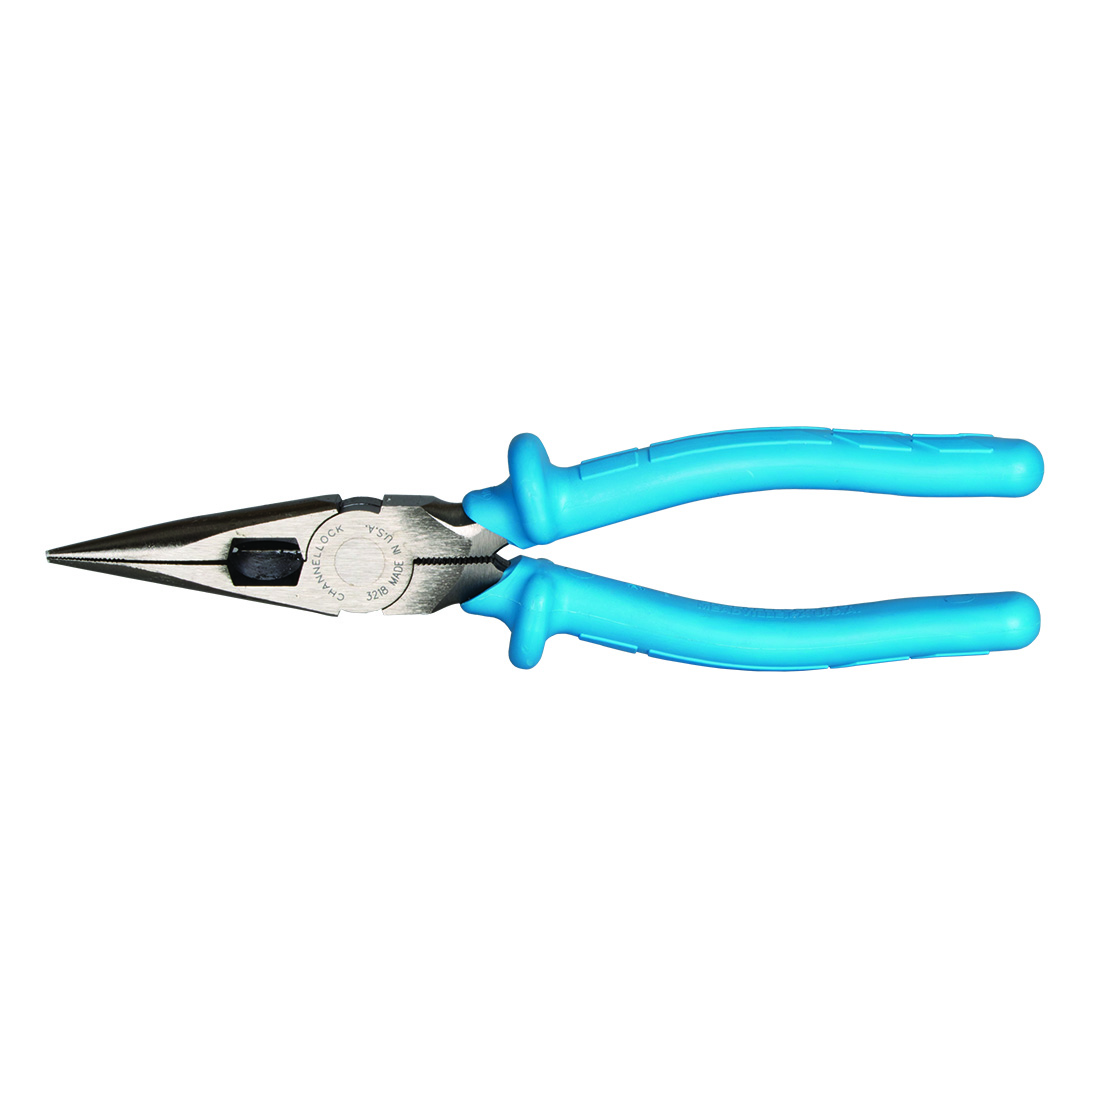 K Tool 51111 Needle Nose Pliers, 11 Long, Bent Nose, 90 Degree